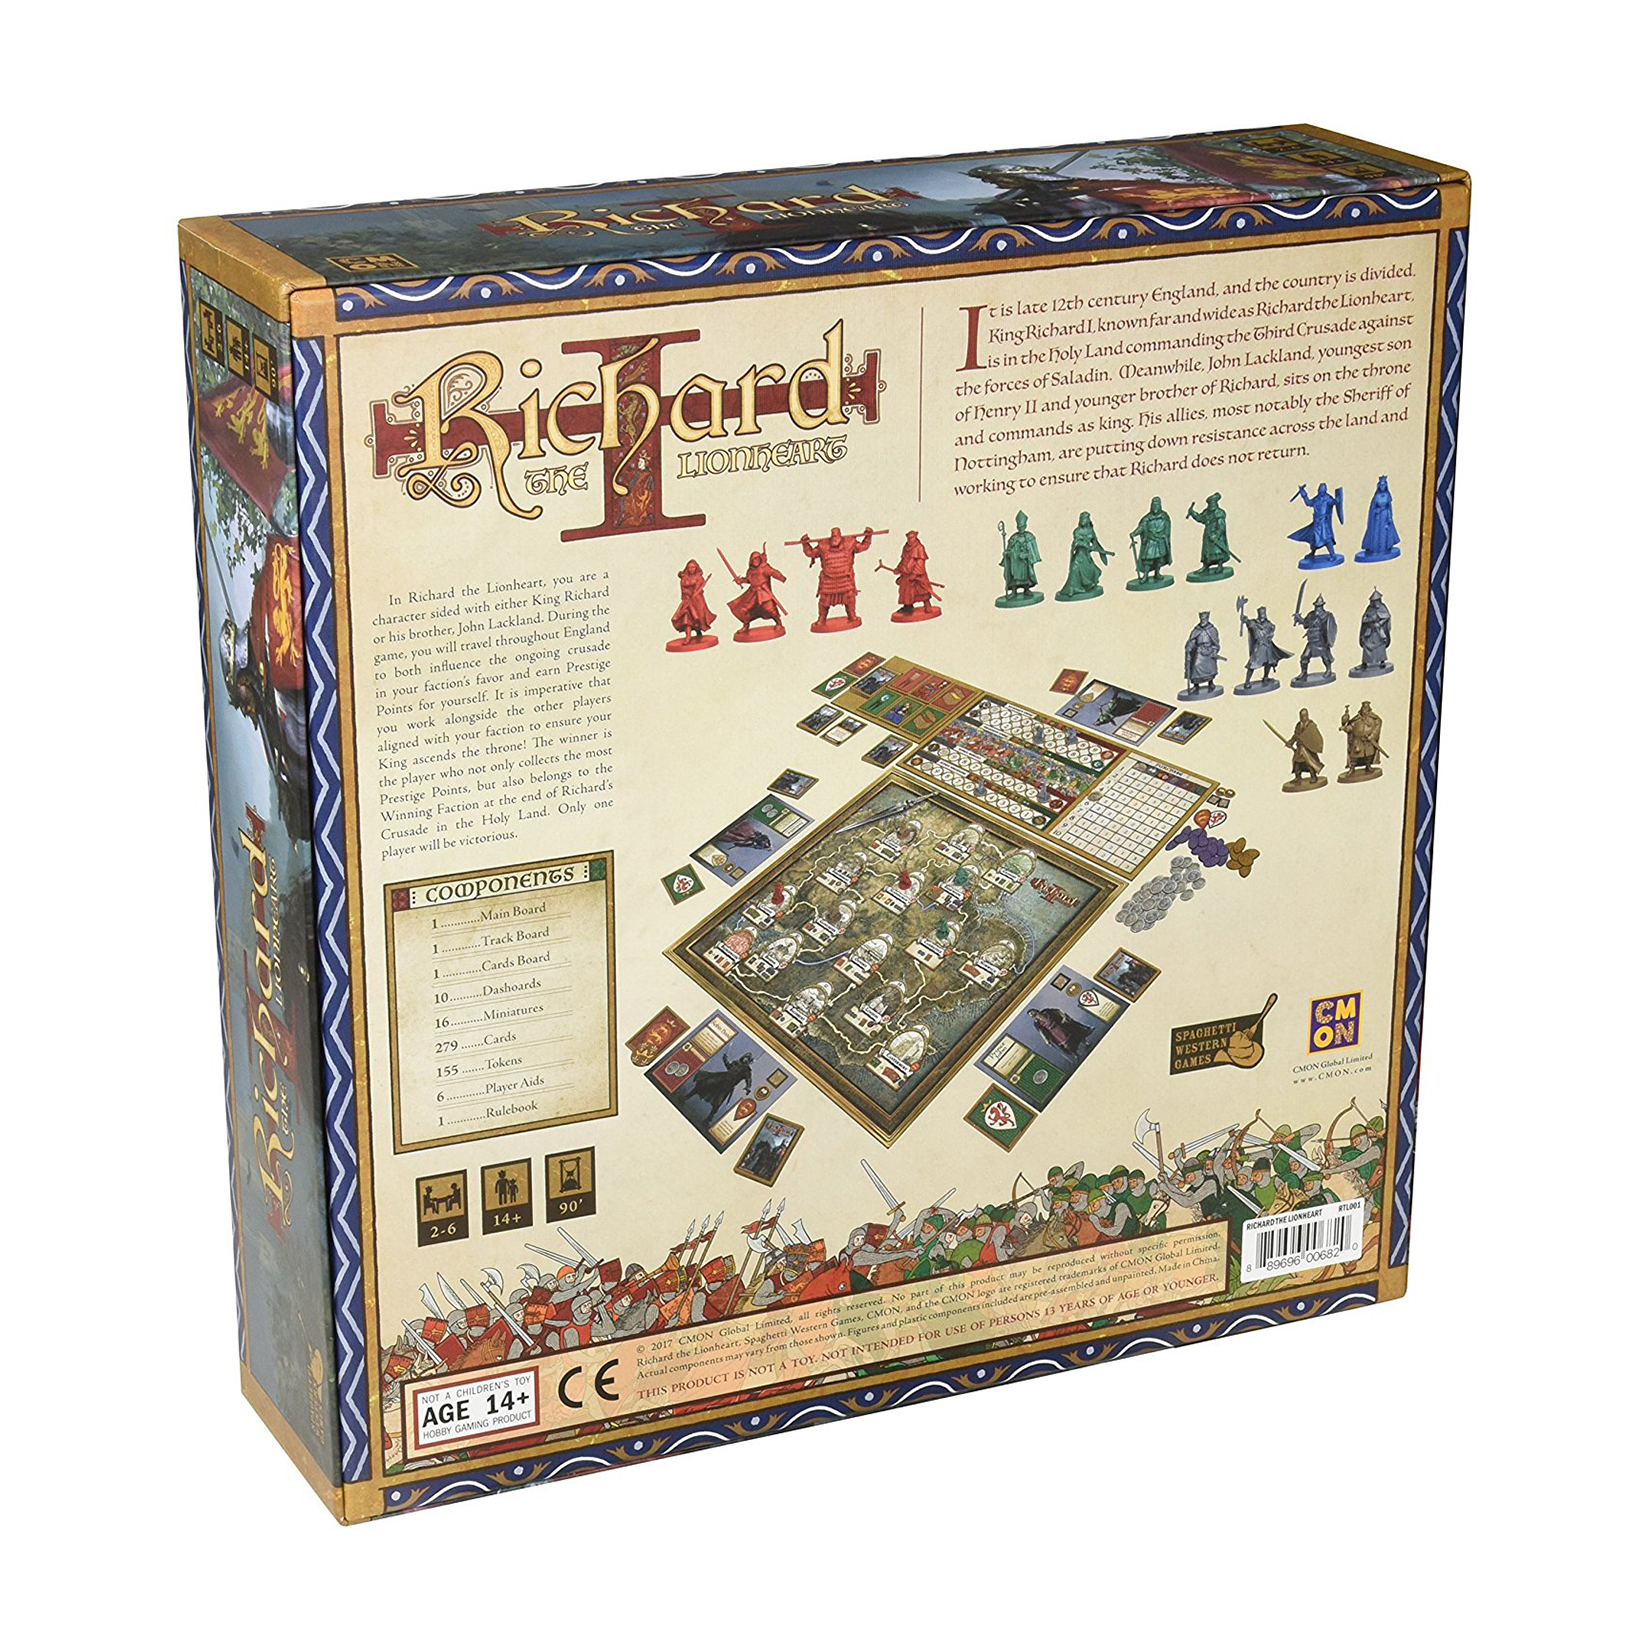 Cmon Richard: the Lionheart Board Game - image 2 of 2